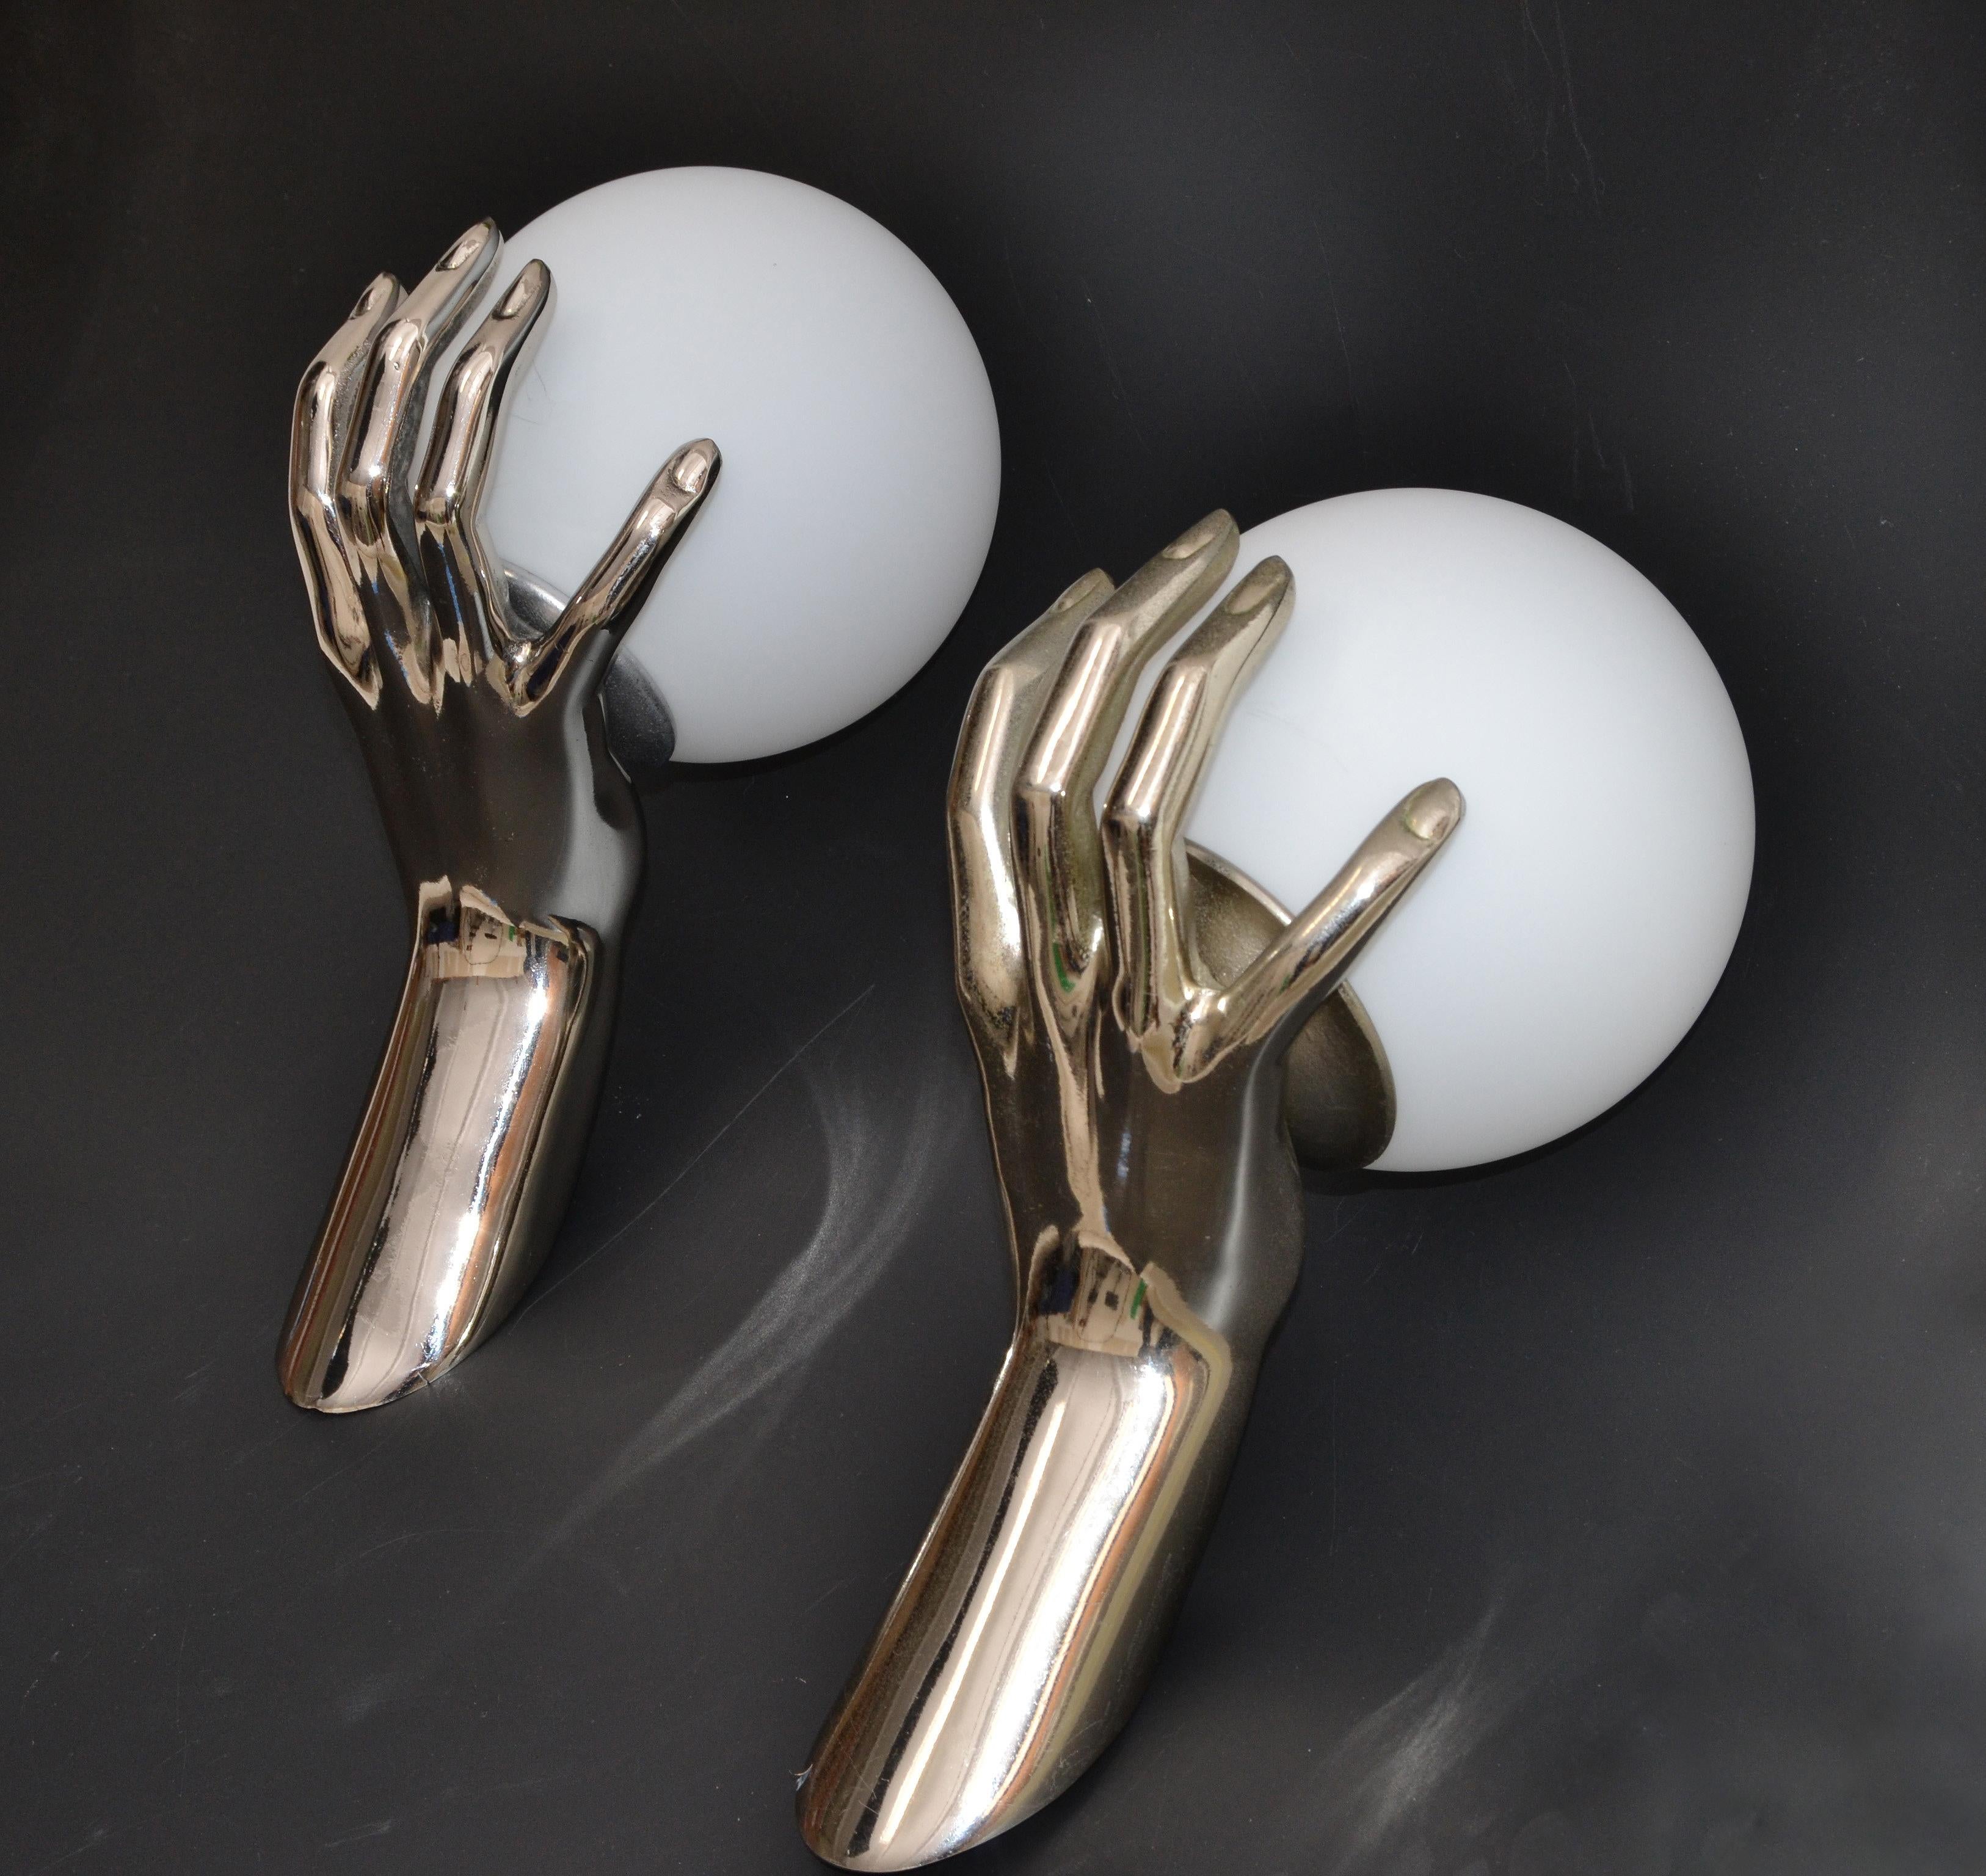 Plated Maison Arlus French Silver Patina Hand Sconces and White Opaline Shades, 1970 For Sale